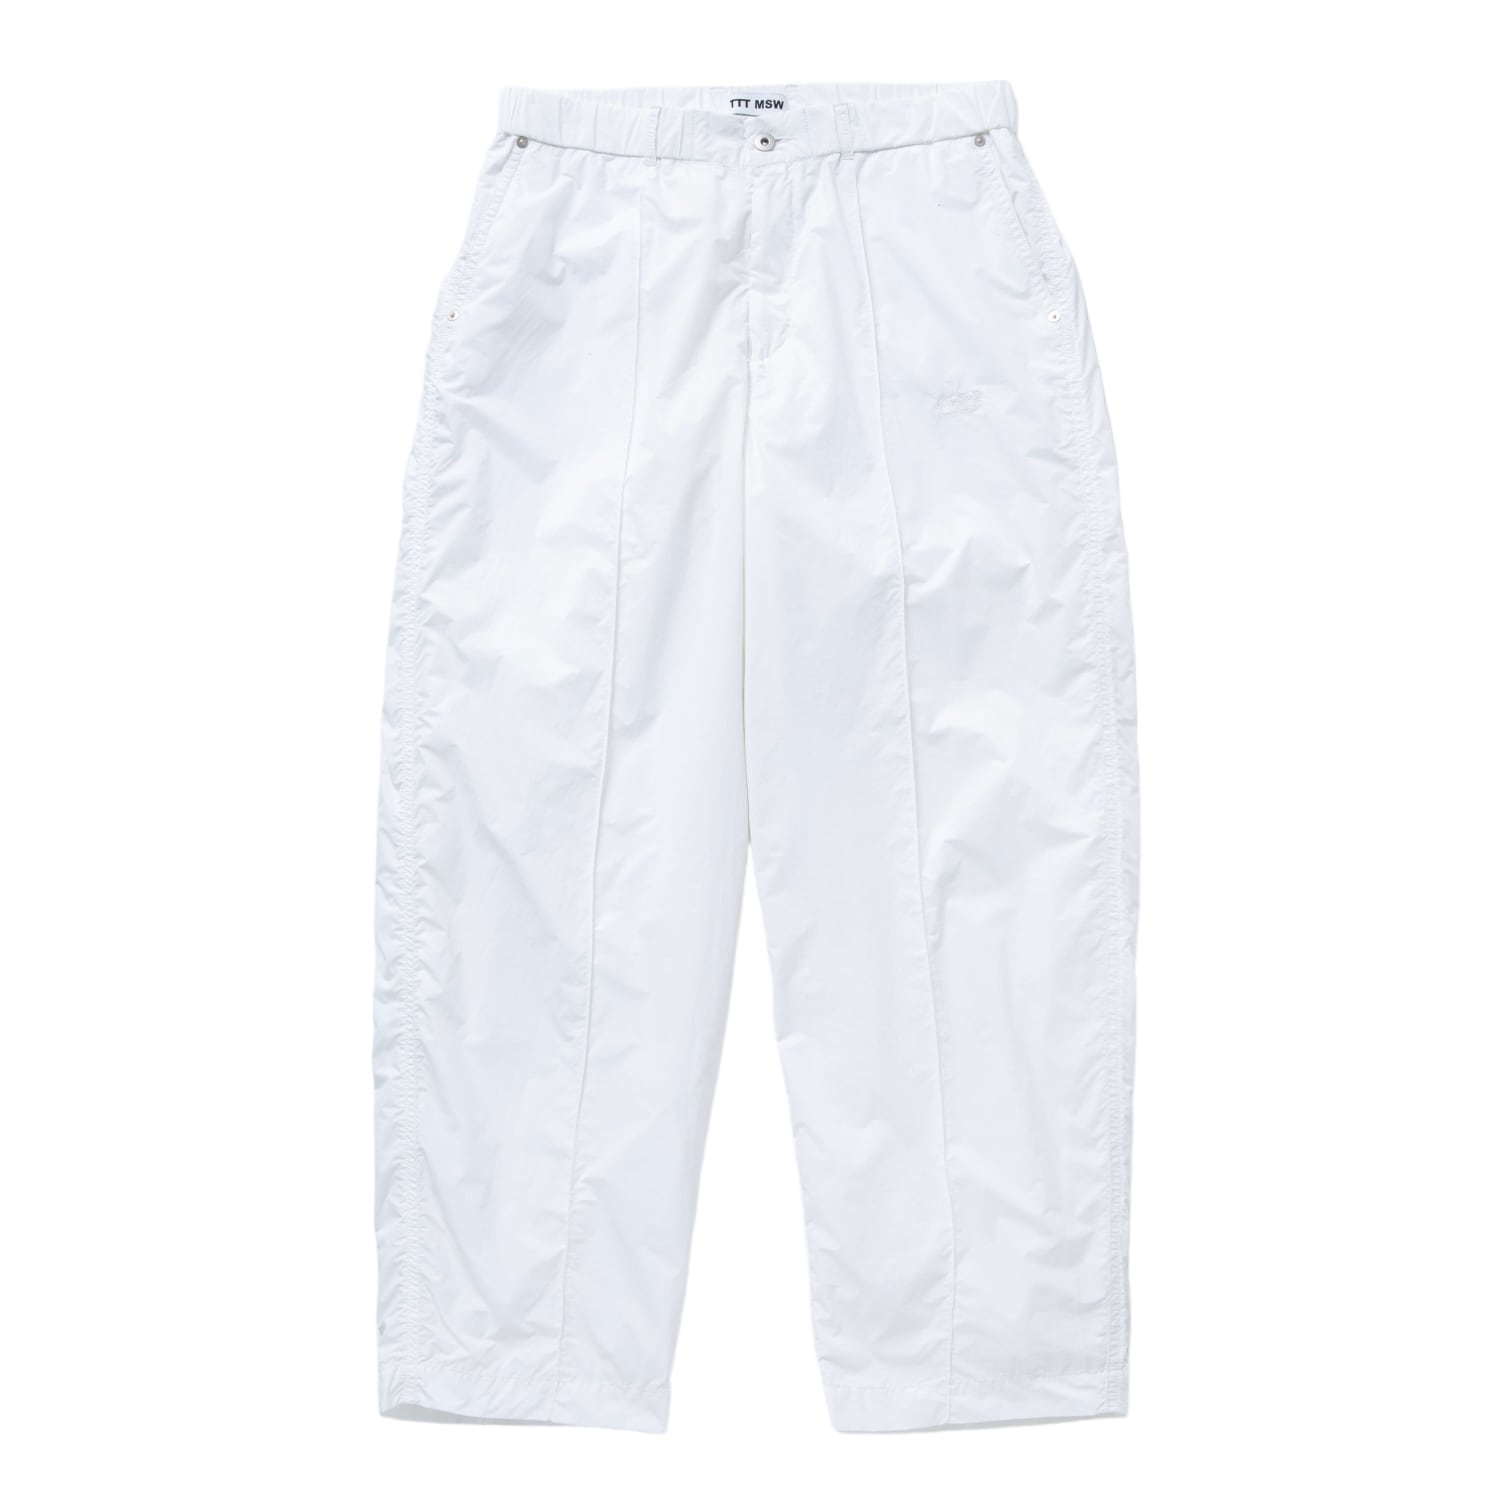 【TTT MSW】New standard wide pants(WHITE)〈送料無料〉 | STORY powered by BASE